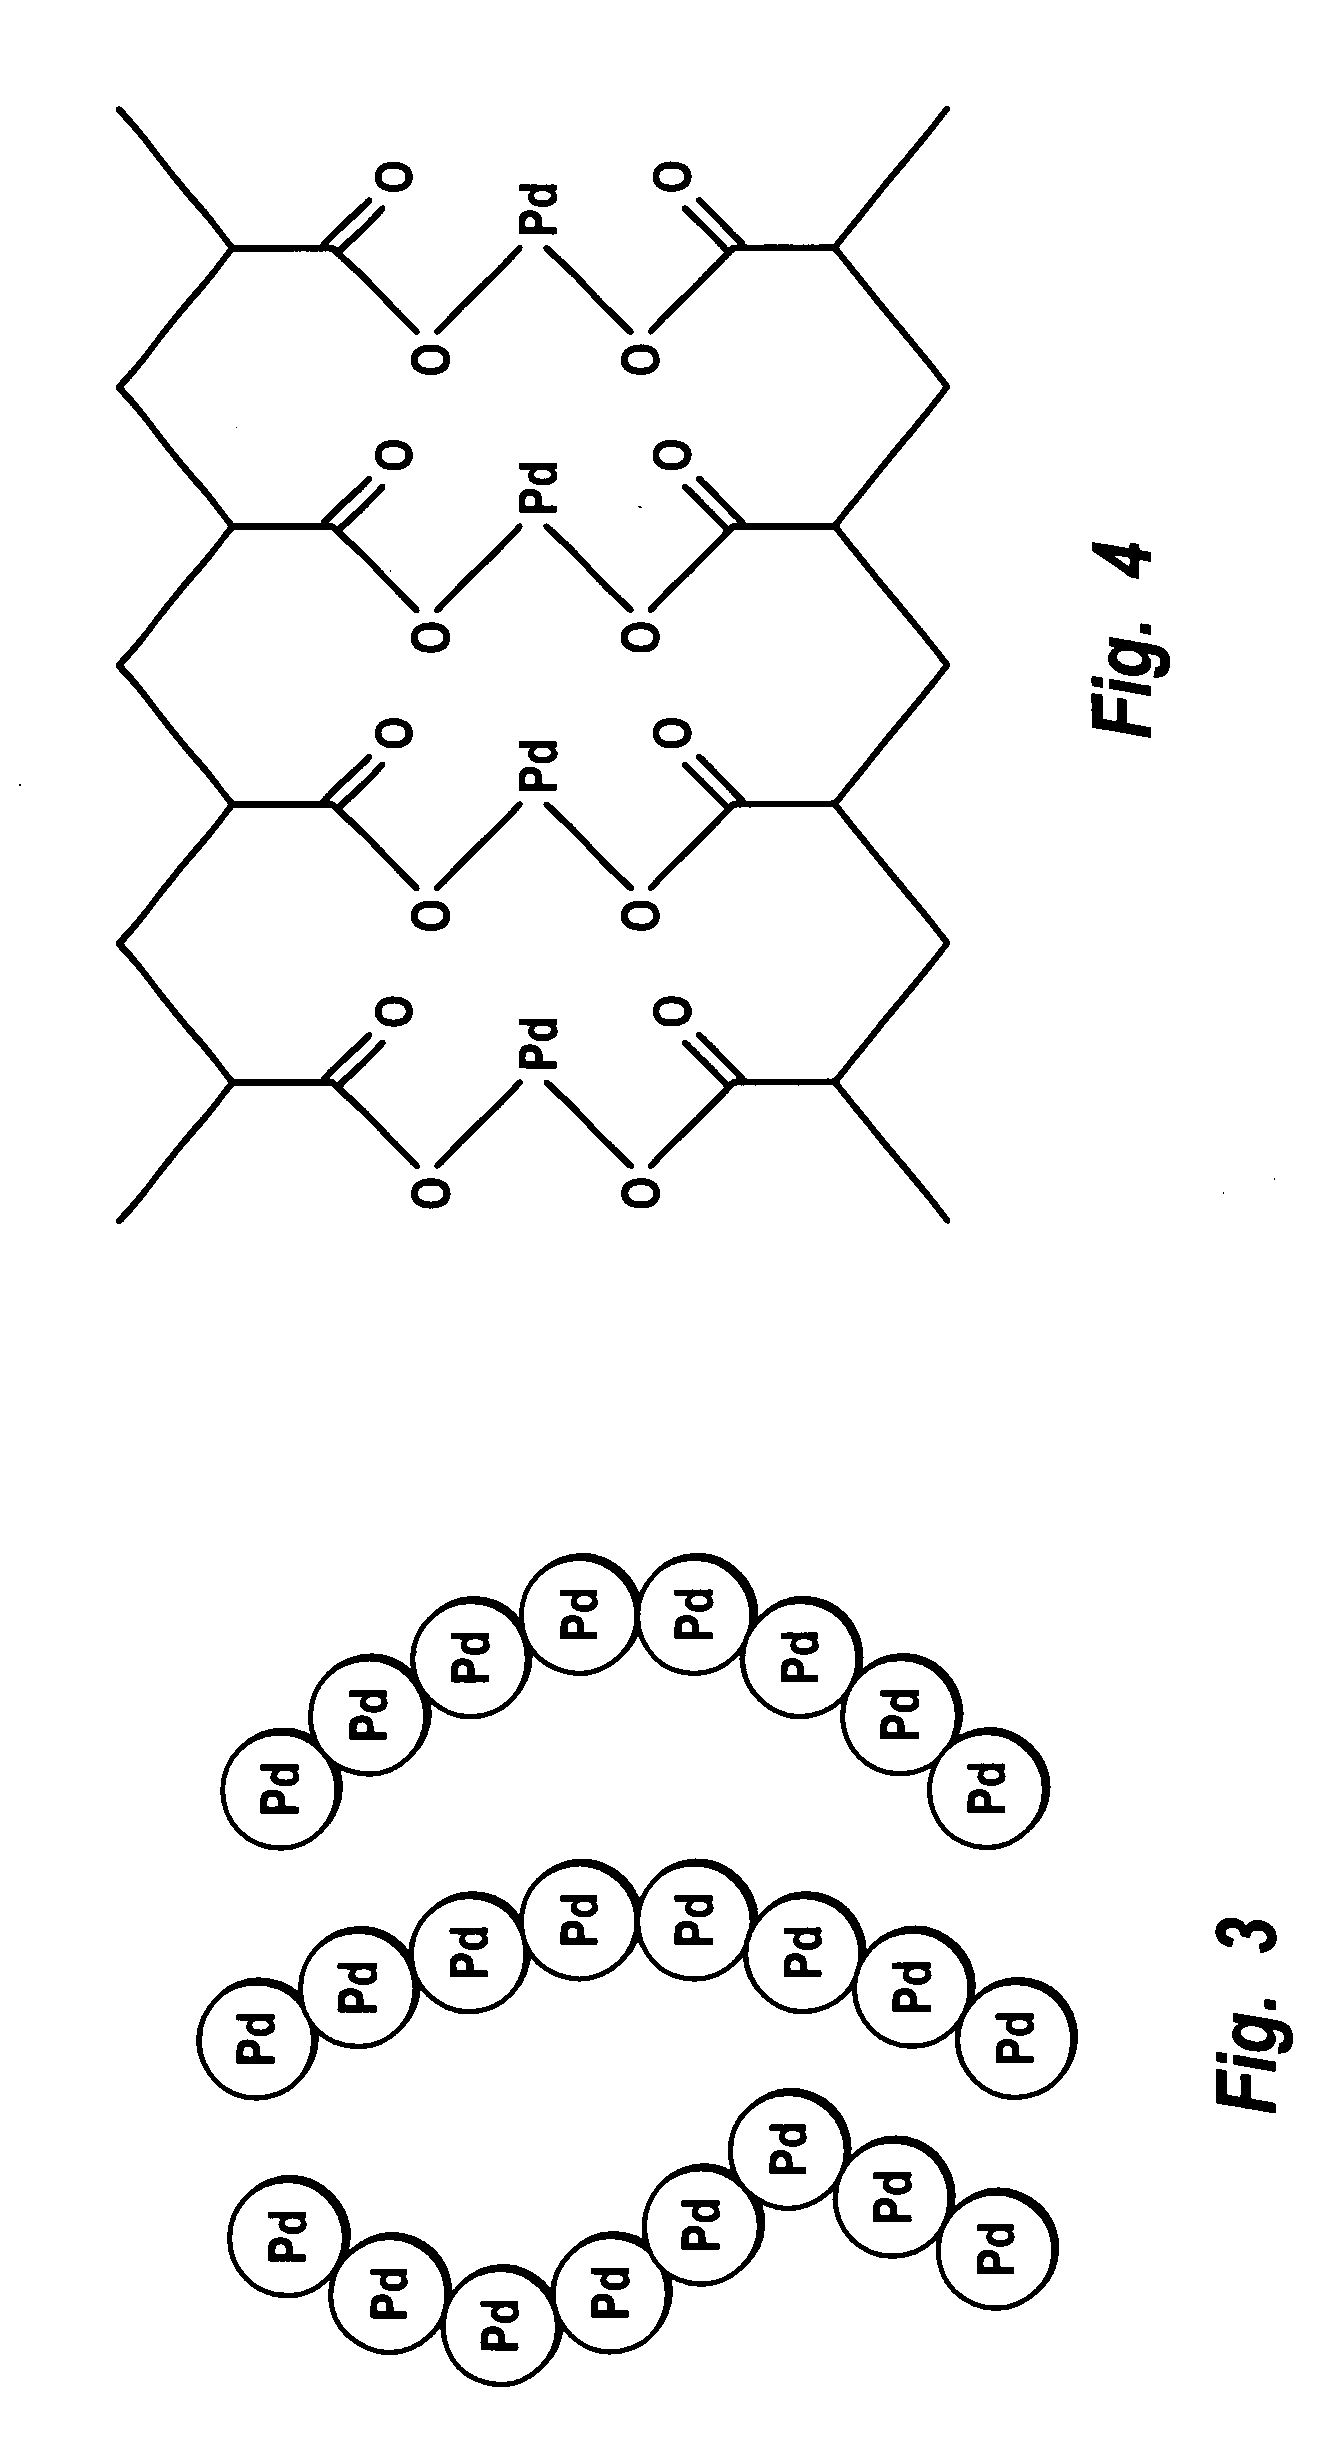 Intermediate precursor compositions used to make supported catalysts having a controlled coordination structure and methods for preparing such compositions